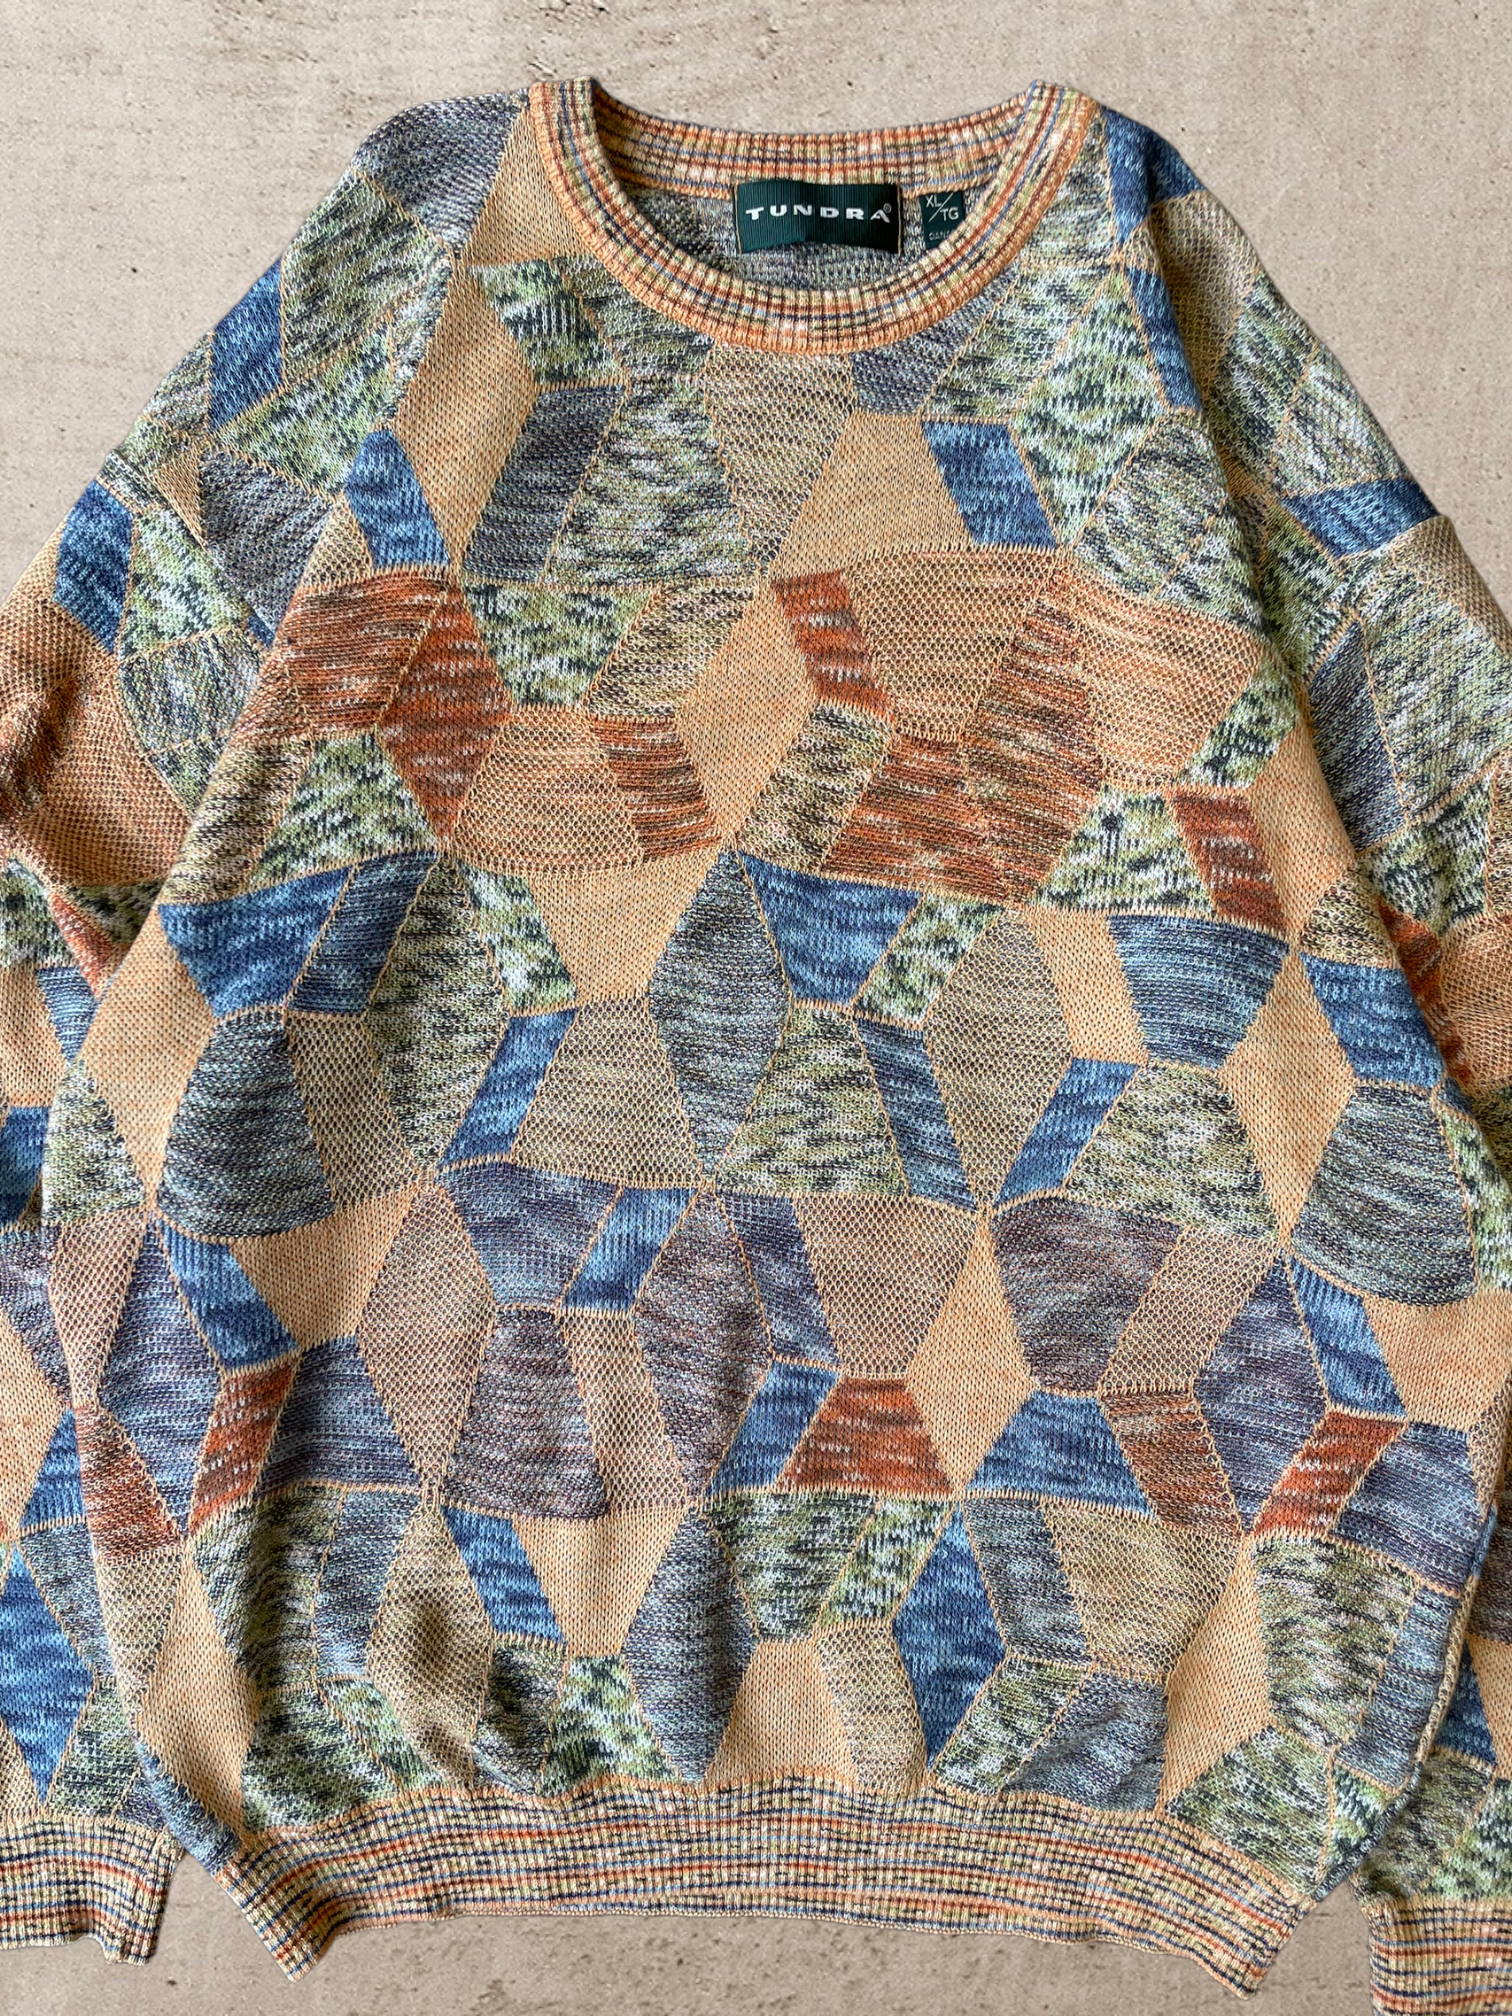 90s Multicolor Knit Tundra Sweater -X-Large